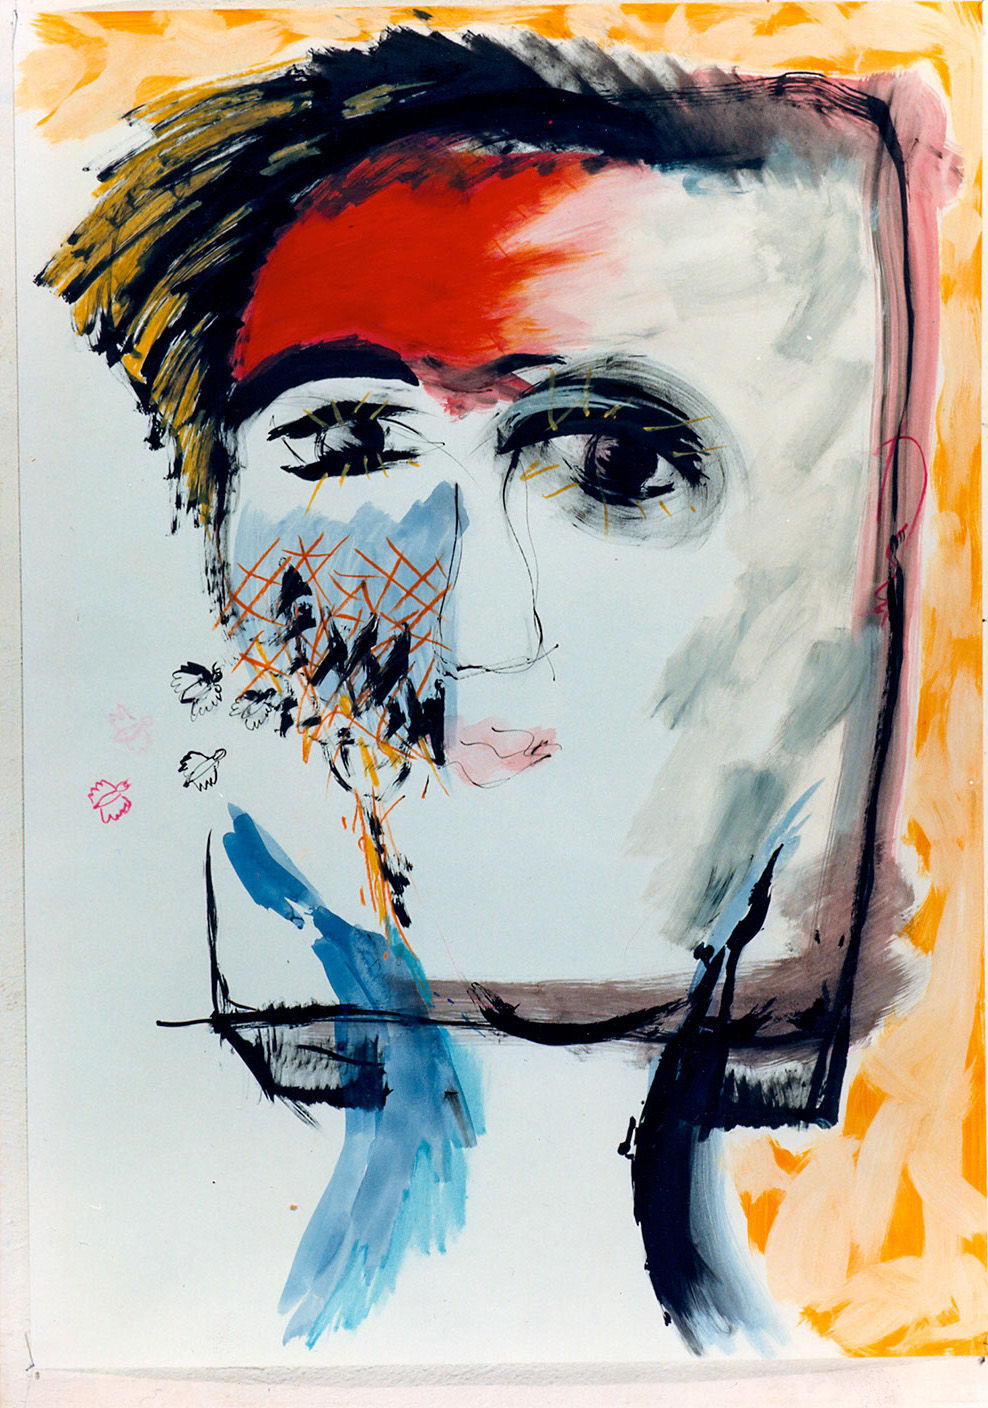 Title: Faces 7
Materials: Acrylic, Ink, Oil Pastel on paper
Size: 100x70 cm
Year: 1986